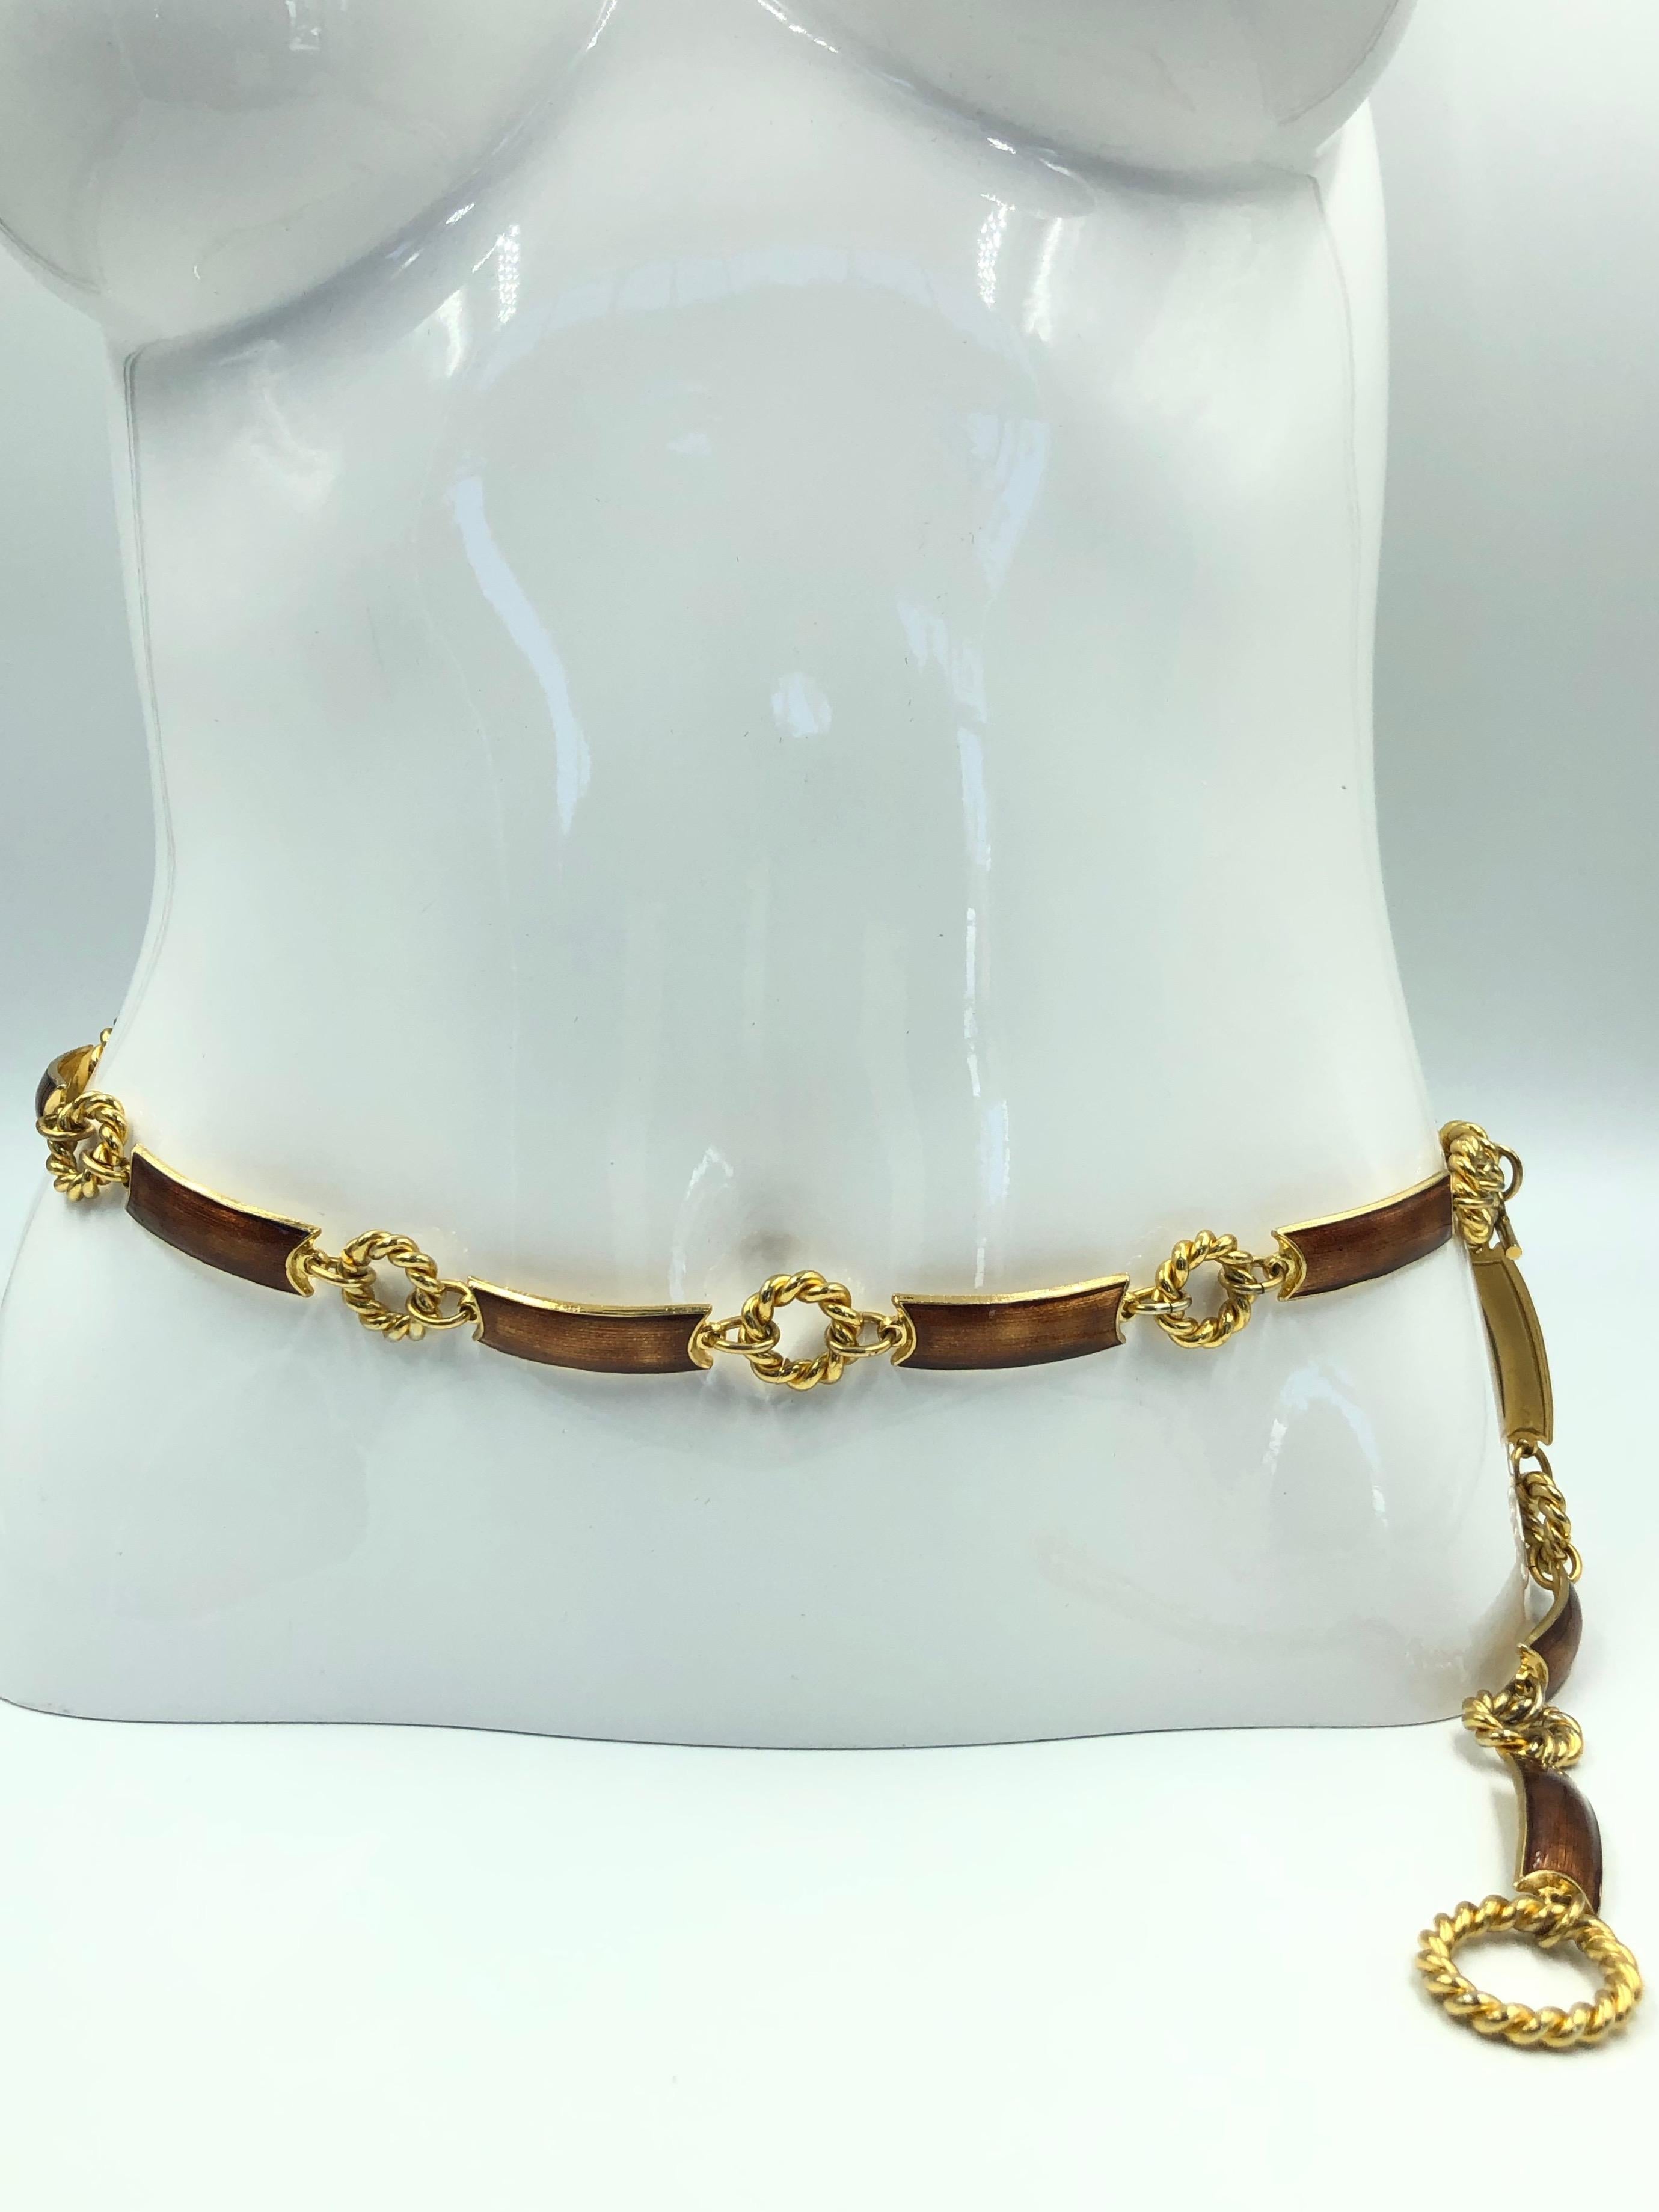 Gucci 1970's Gold Tone with Bronze Enamel Chain Link Belt

Length: 35.5